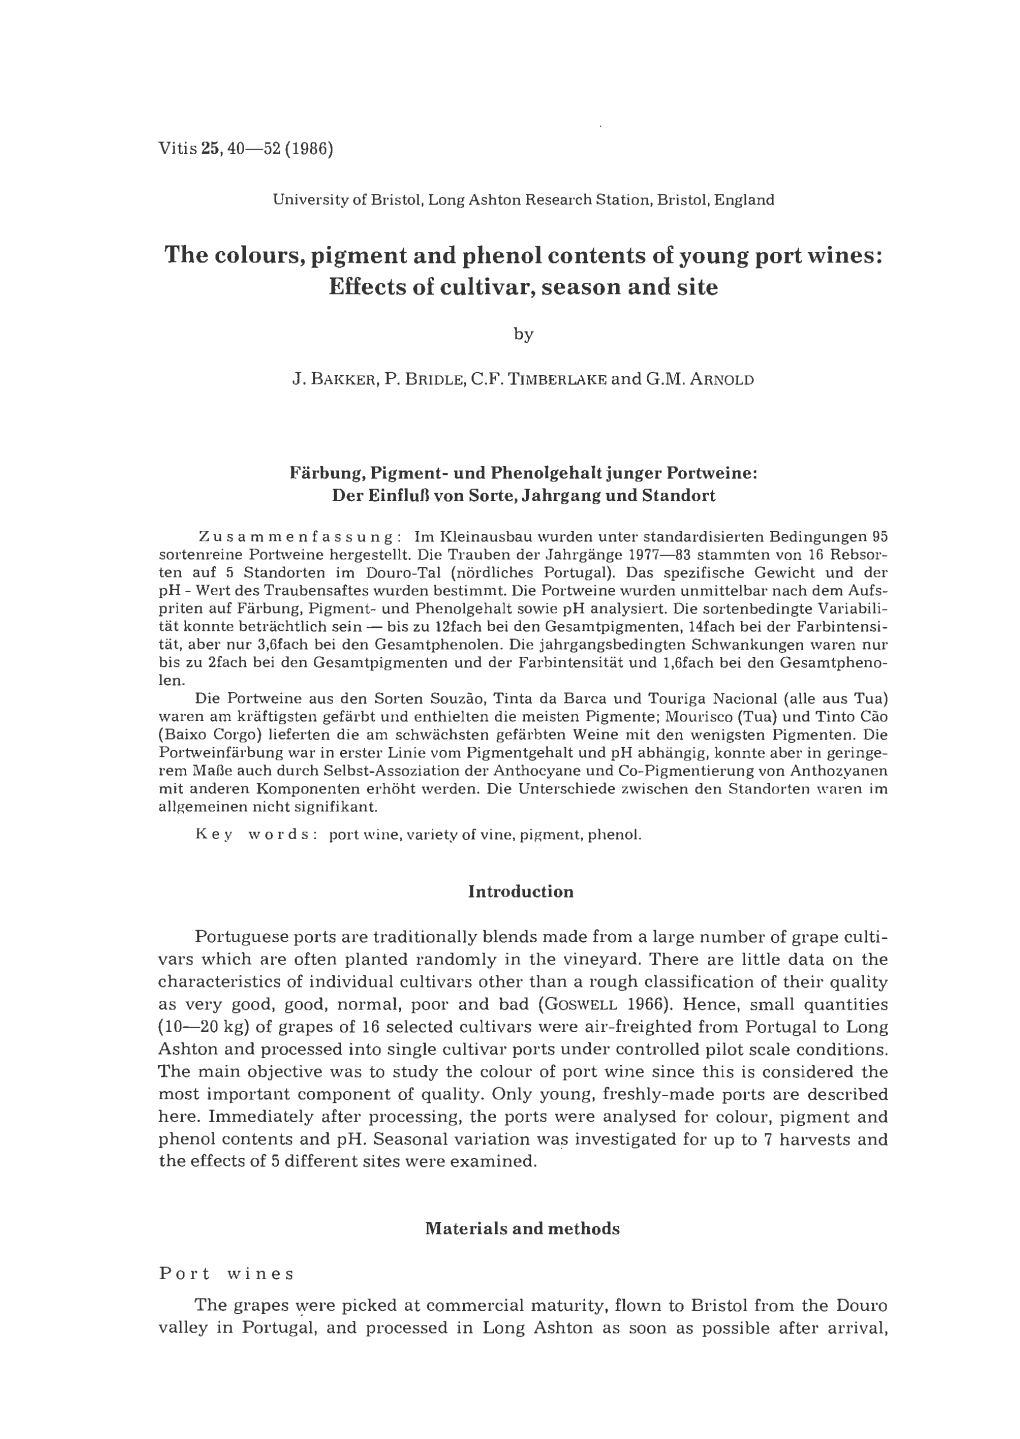 The Colours, Pigment and Phenol Contents of Young Port Wines: Effects of Cultivar, Season and Site